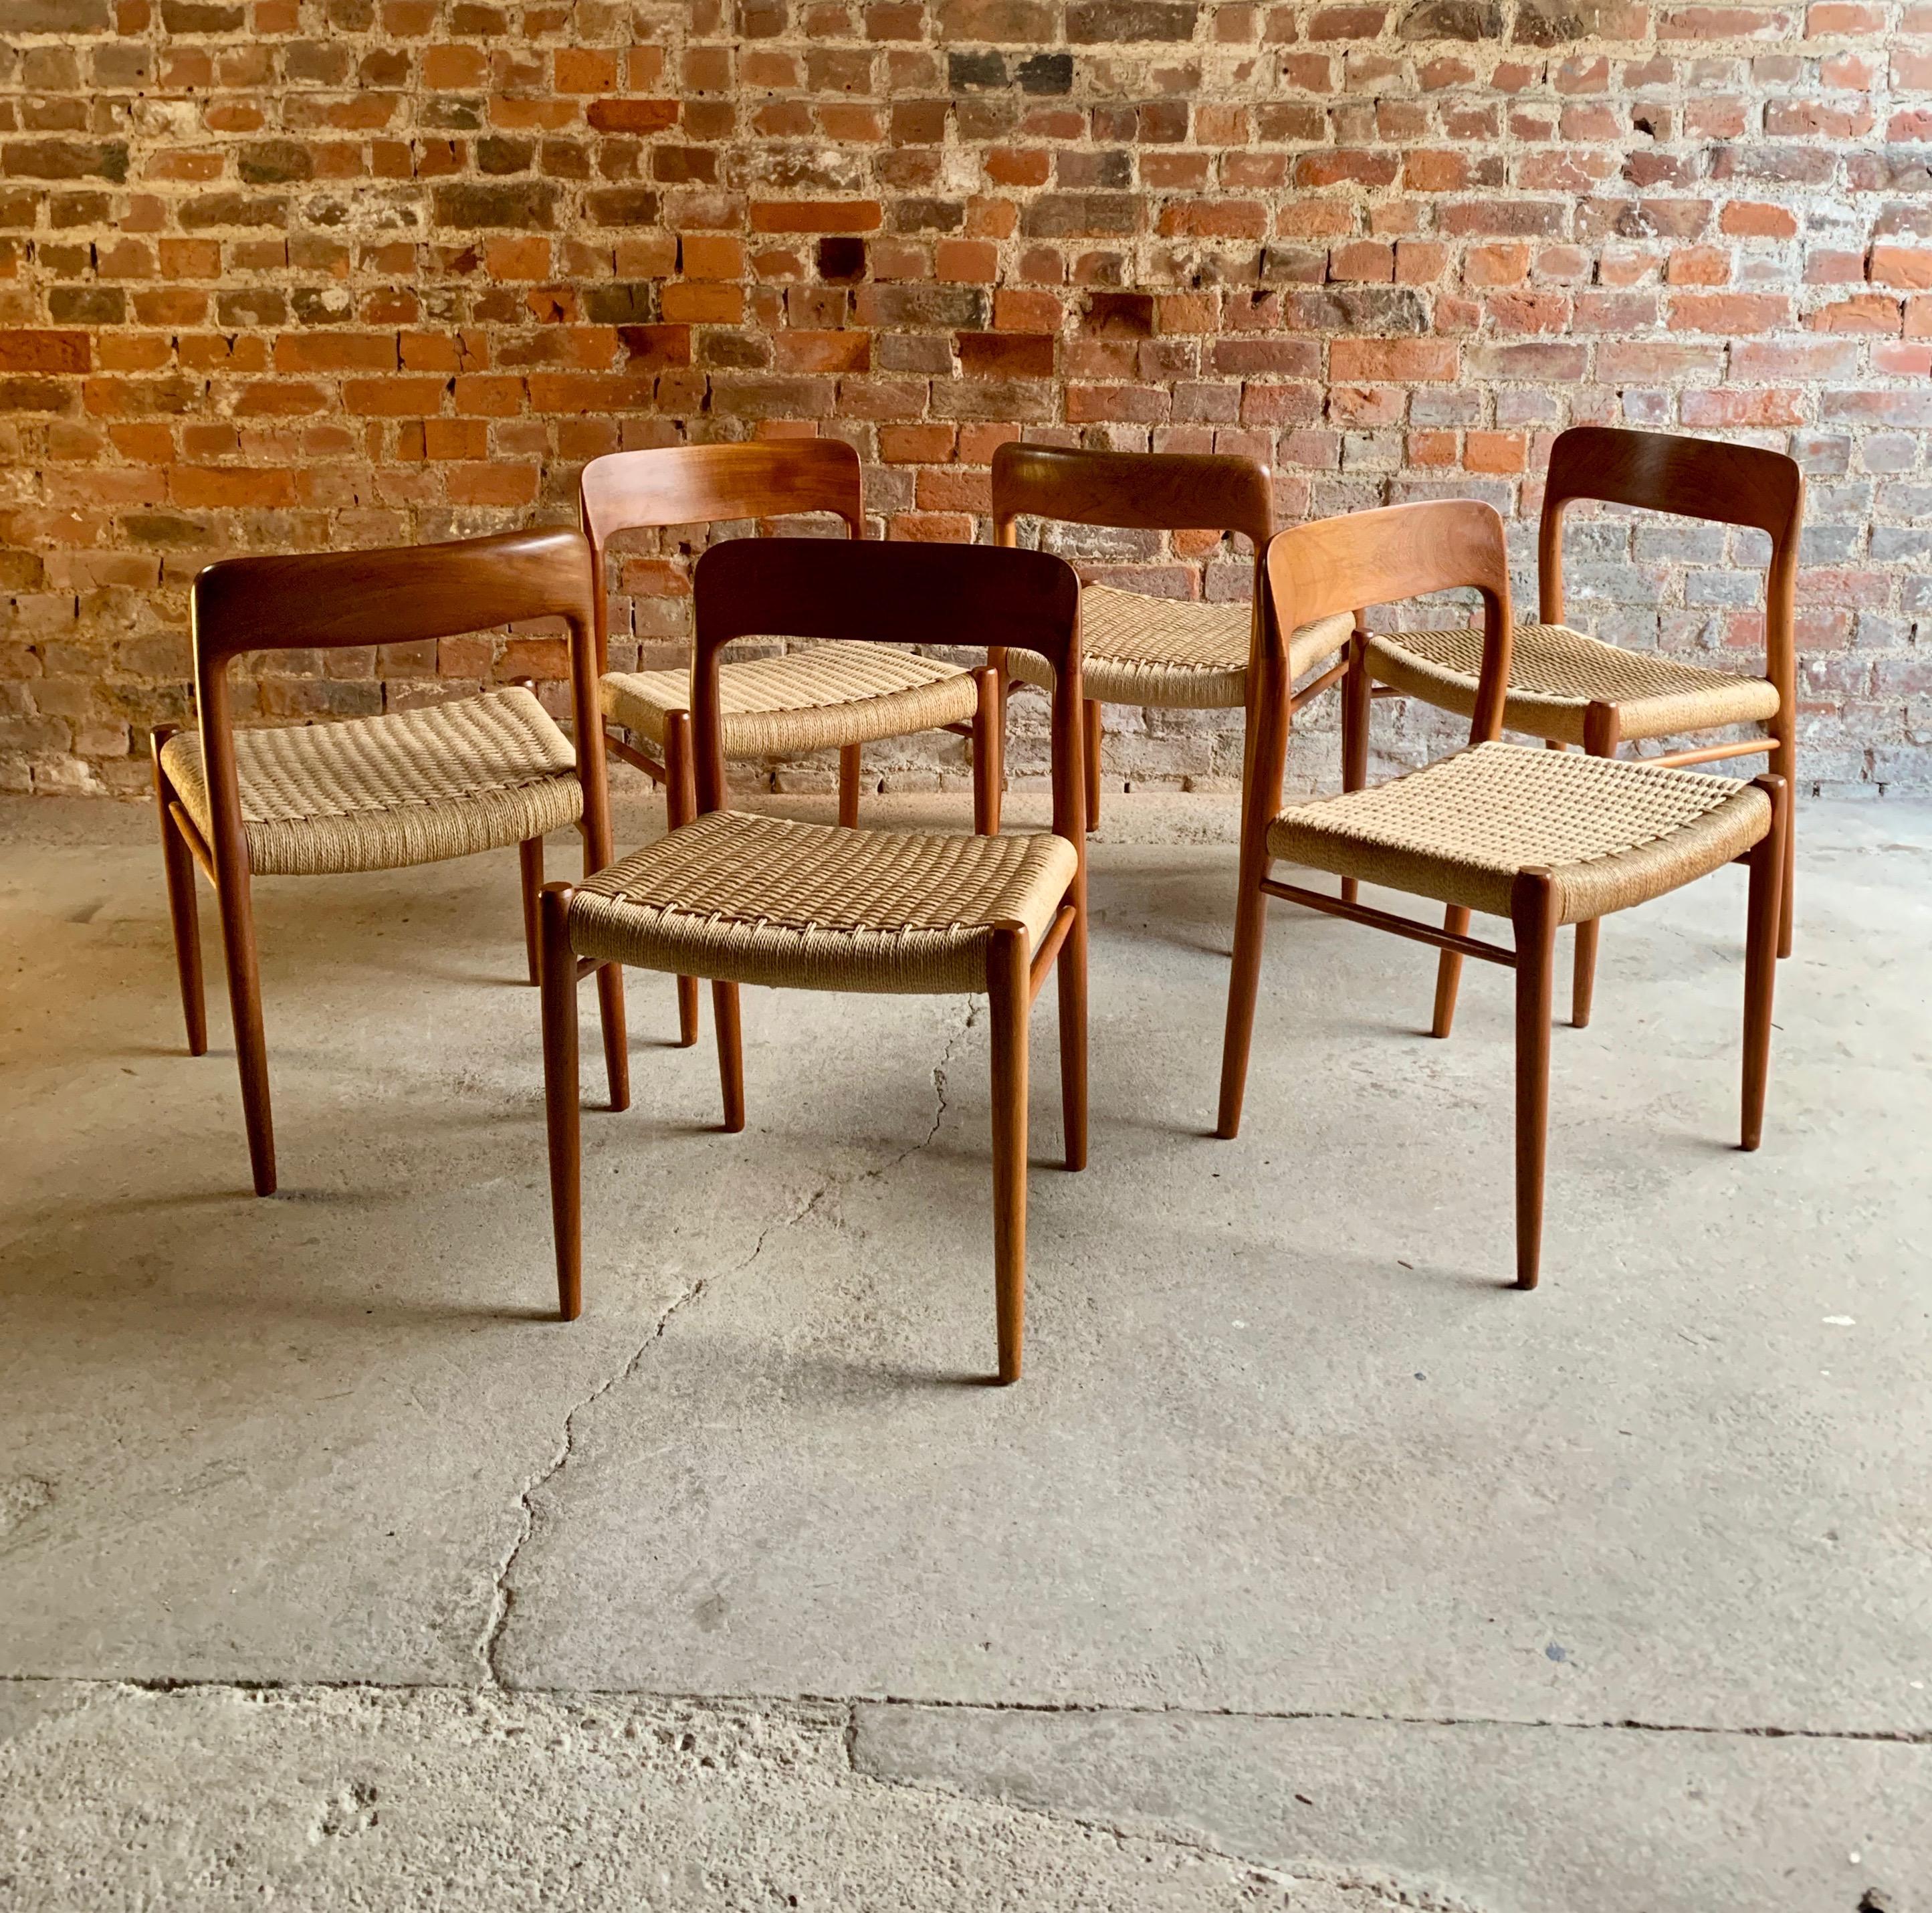 A magnificent set of six model 75 chairs by Danish designer Niels Otto Møller, and manufactured by JL Møllers Møbelfabrik chair featuring frames made of solid teak and seating made of paper cord. 

Condition: The chairs are offered in excellent